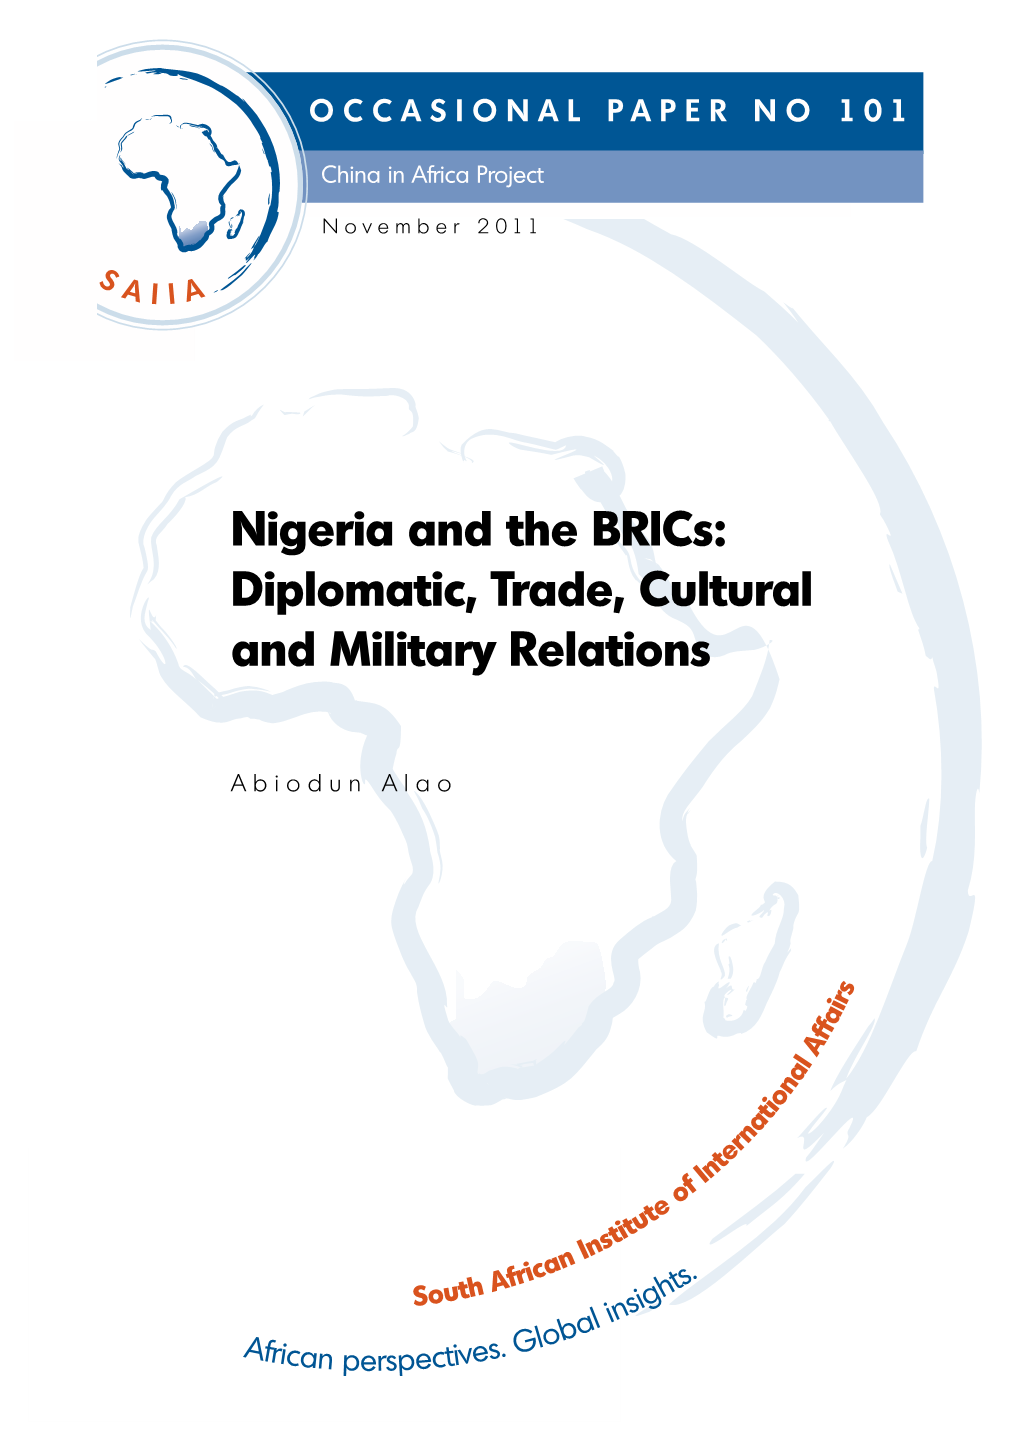 Nigeria and the Brics: Diplomatic, Trade, Cultural and Military Relations